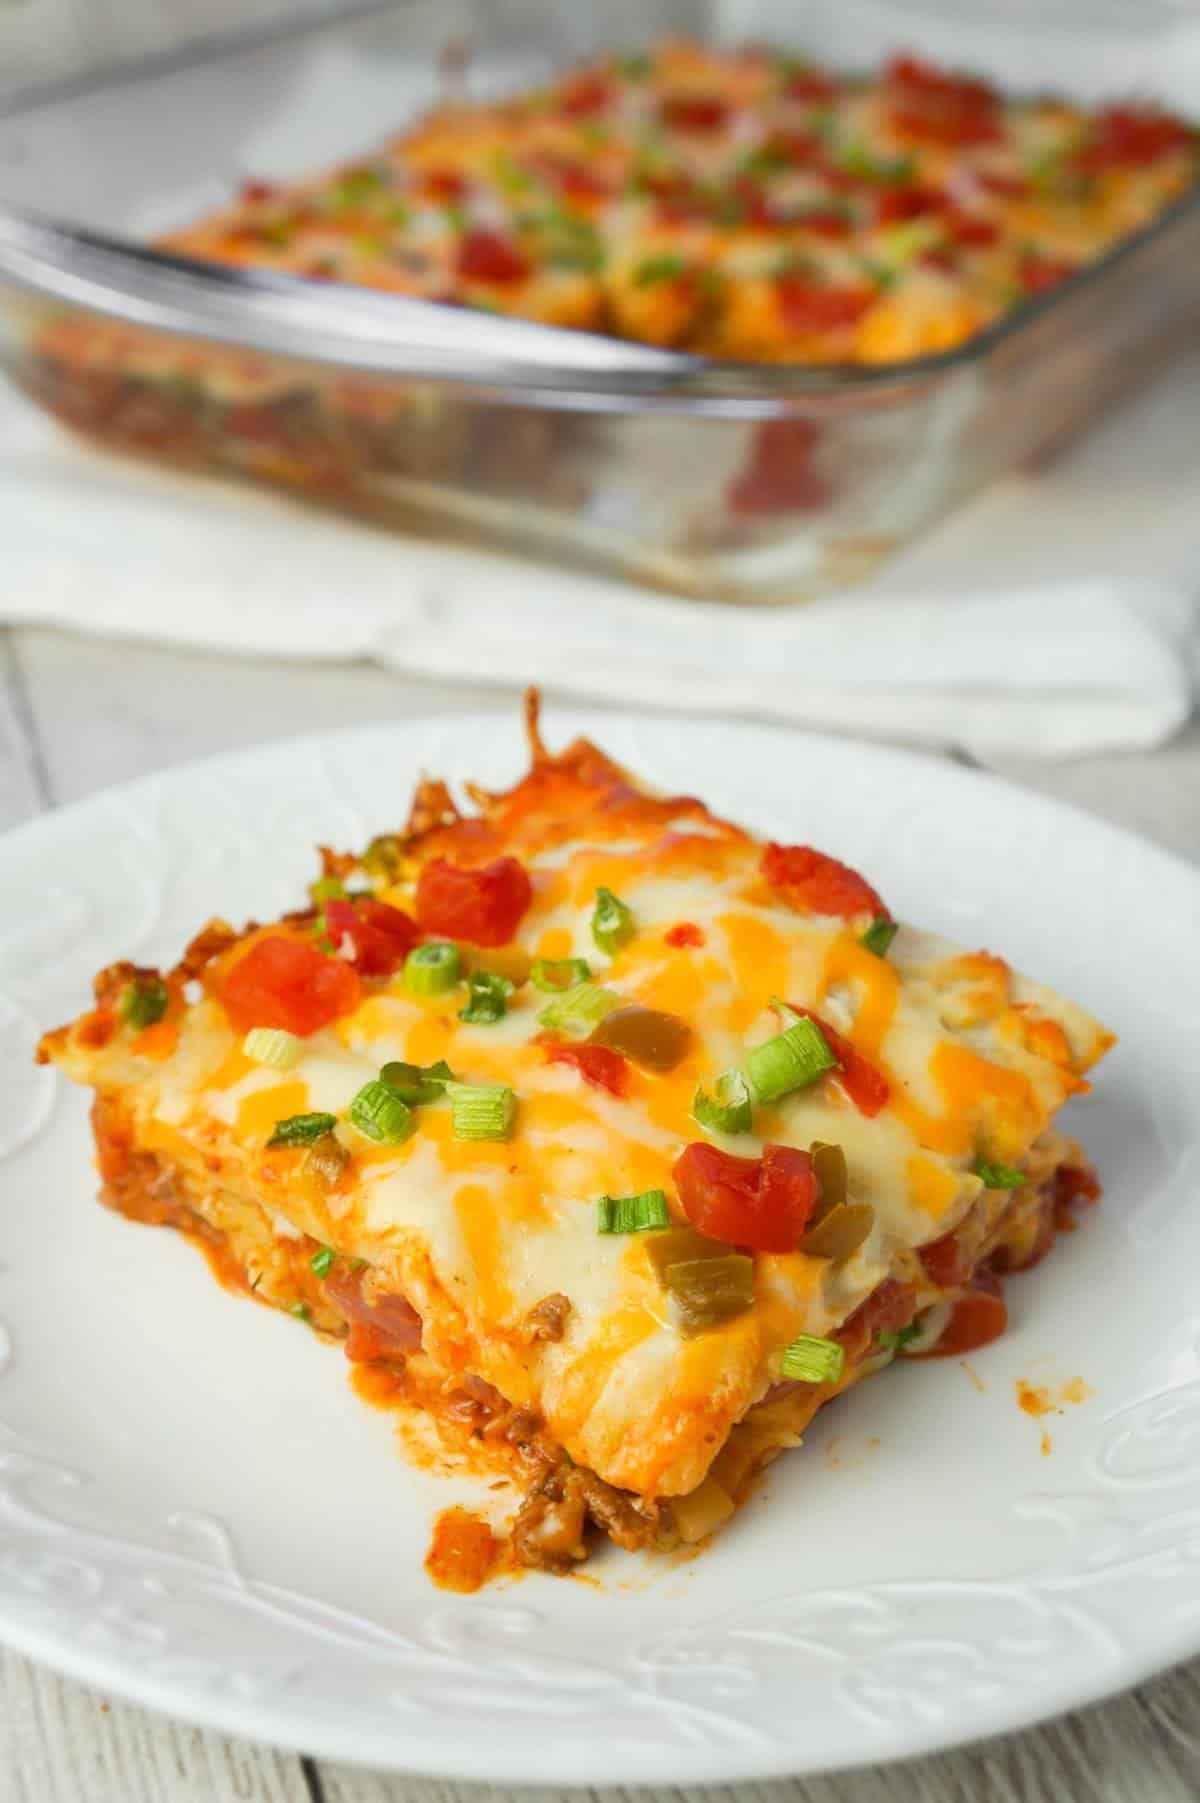 Taco Lasagna is an easy casserole recipe with layers of soft tortillas, shredded cheese, ground beef and salsa.